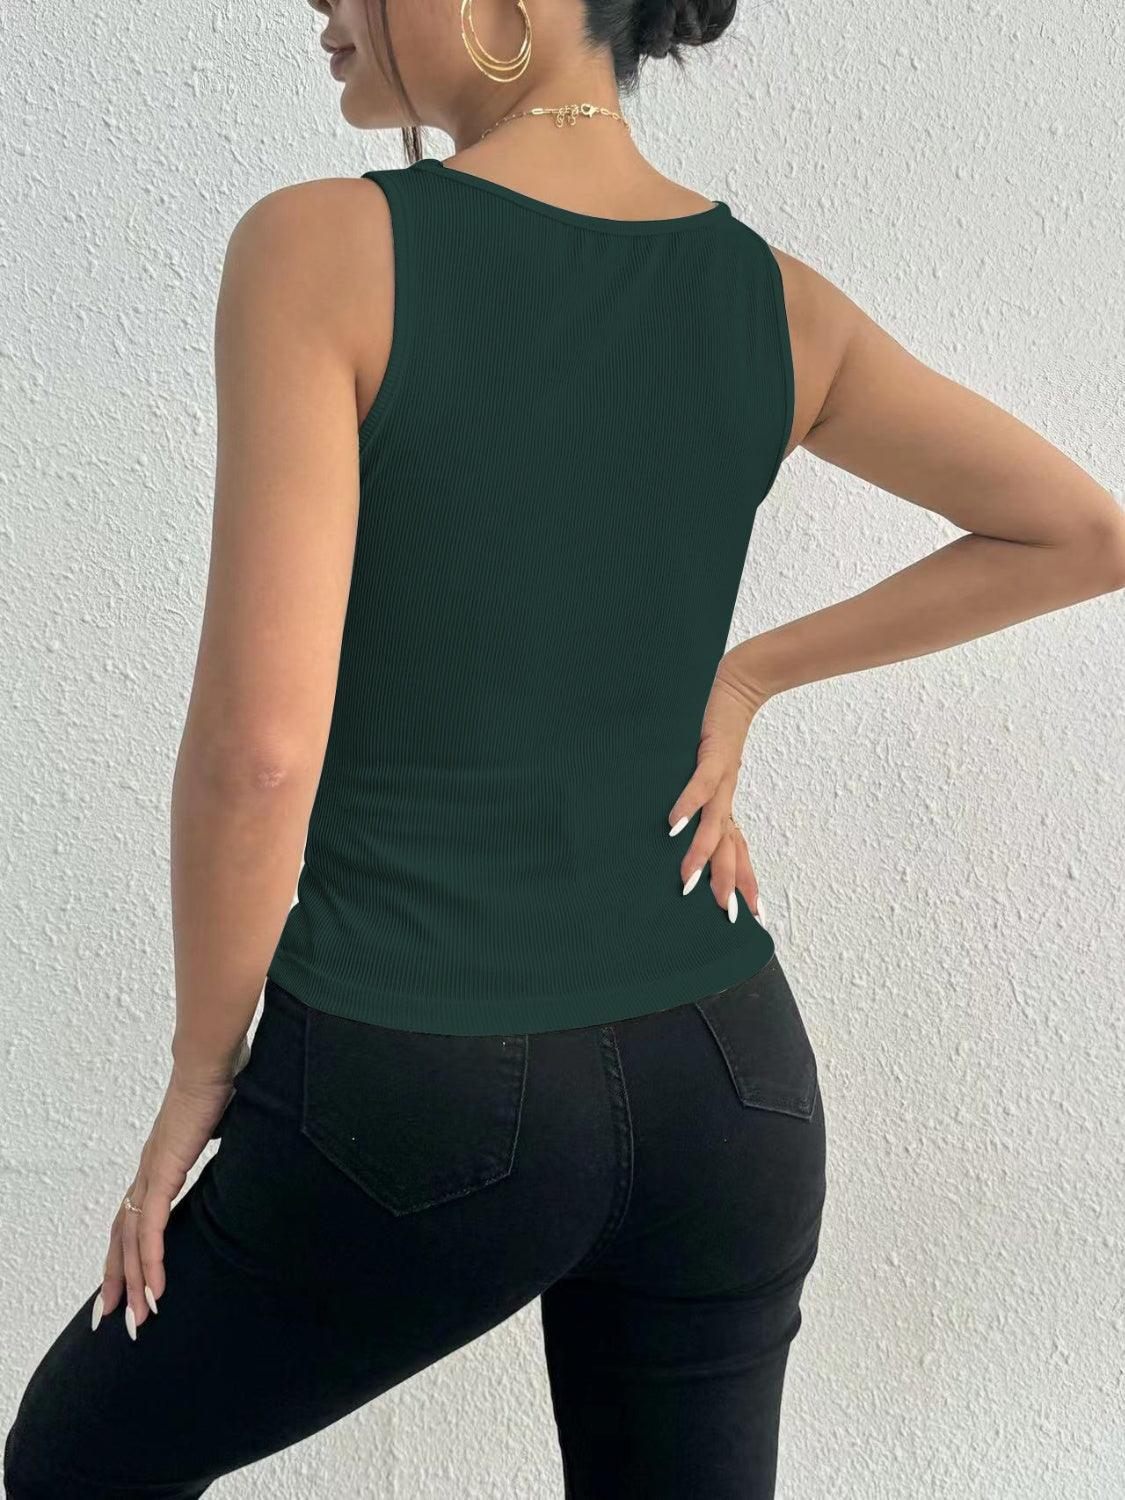 a woman wearing a green top and black pants